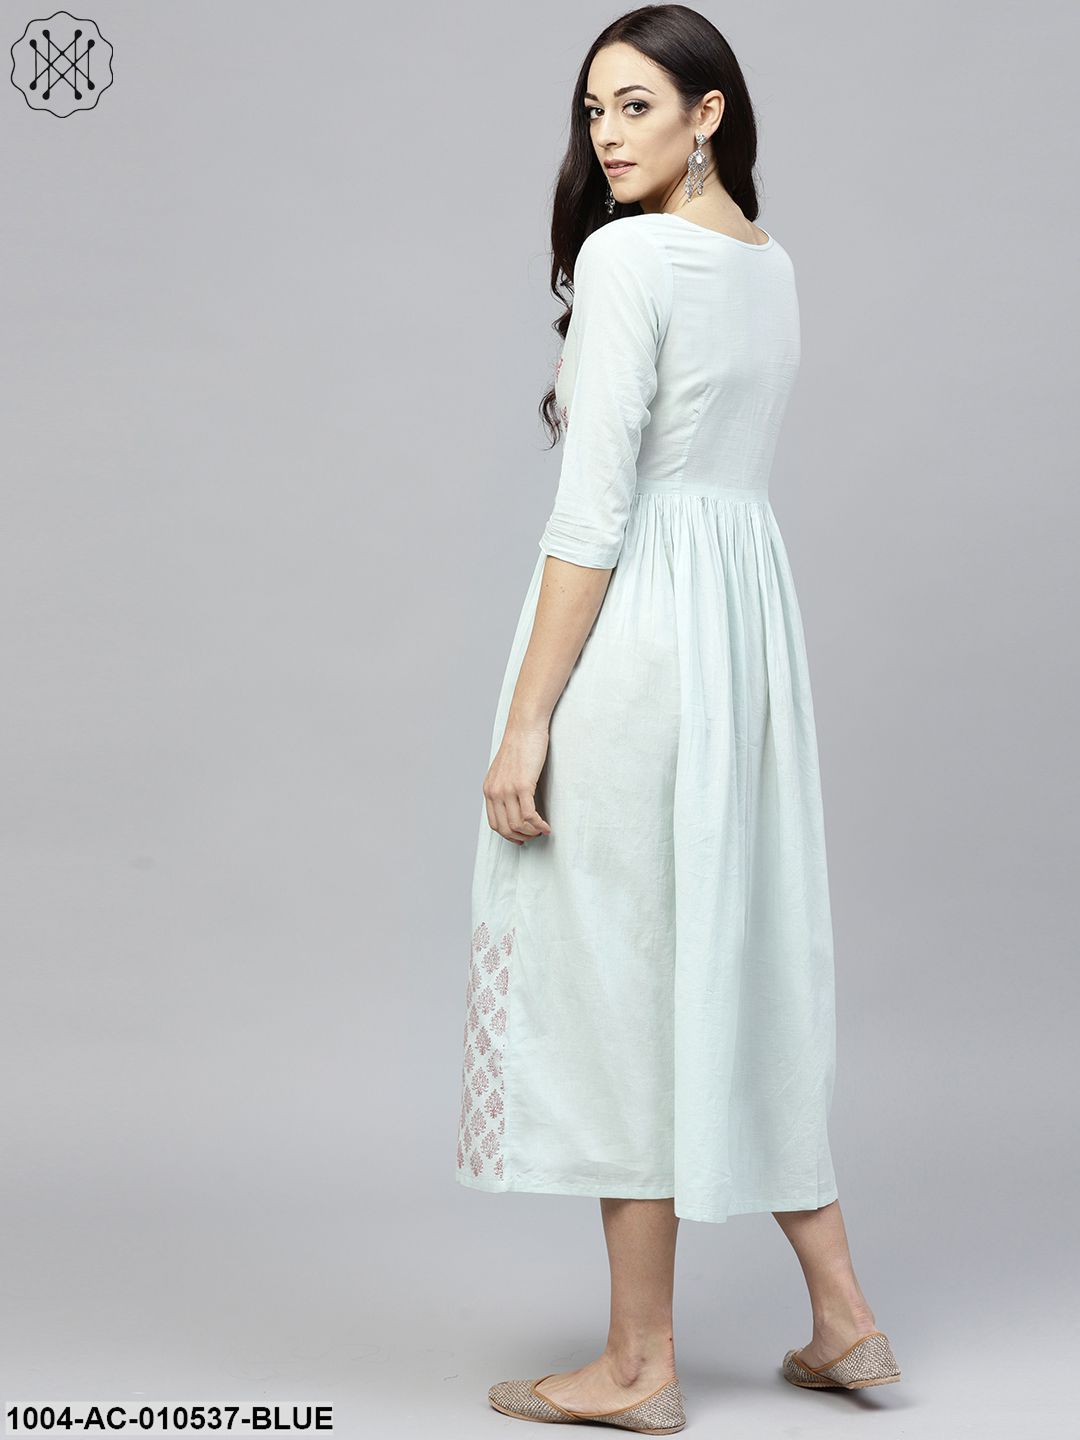 Powder Blue Block Printed Dress With Round Neck And 3/4 Sleeves